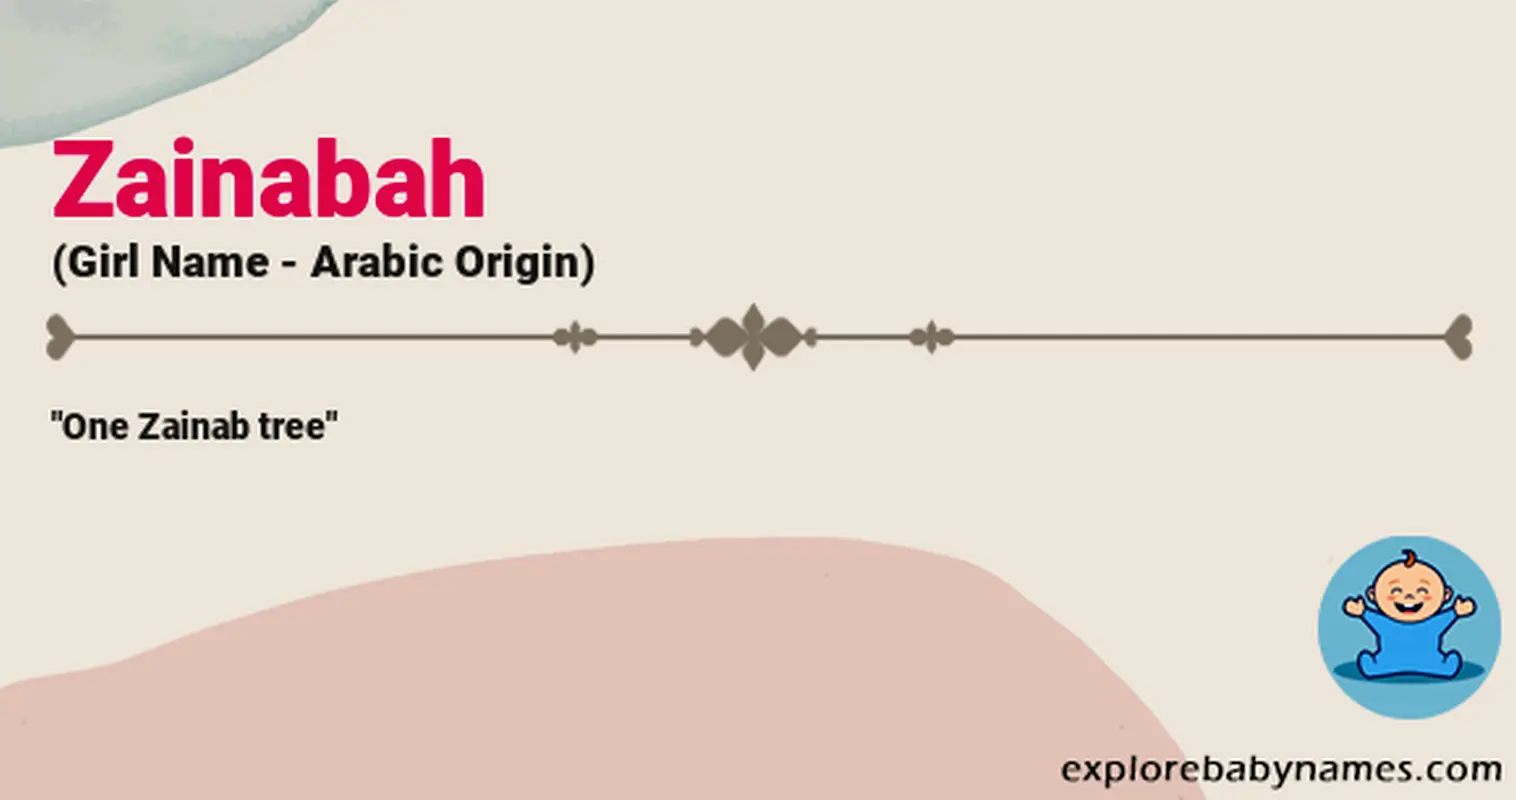 Meaning of Zainabah